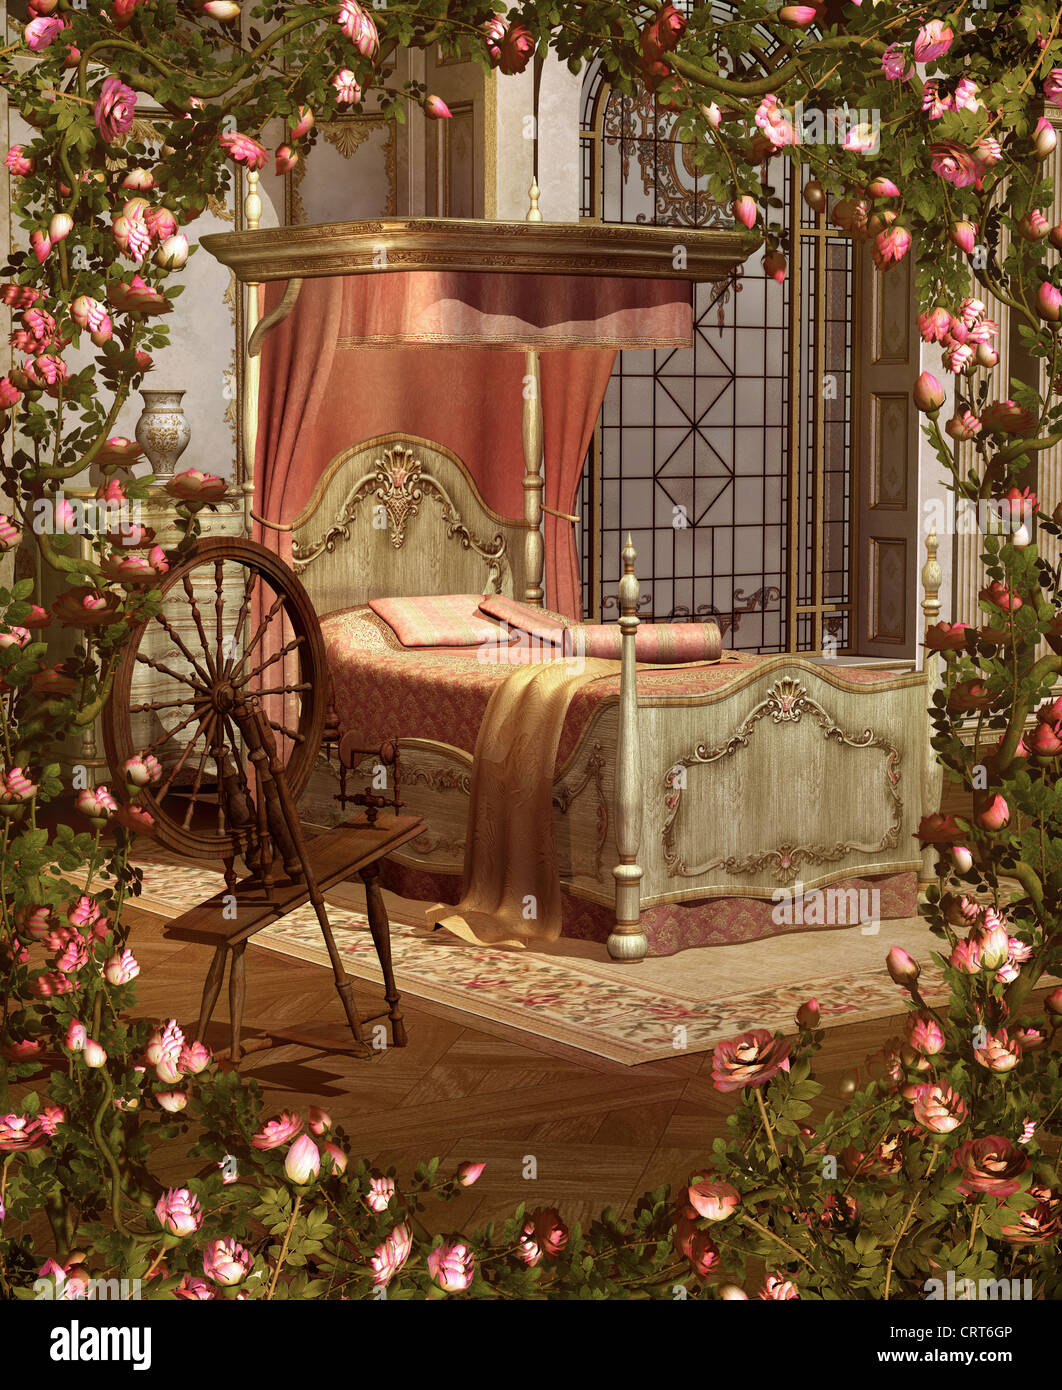 A pink bedroom with spinning wheel surrounded by roses Stock Photo